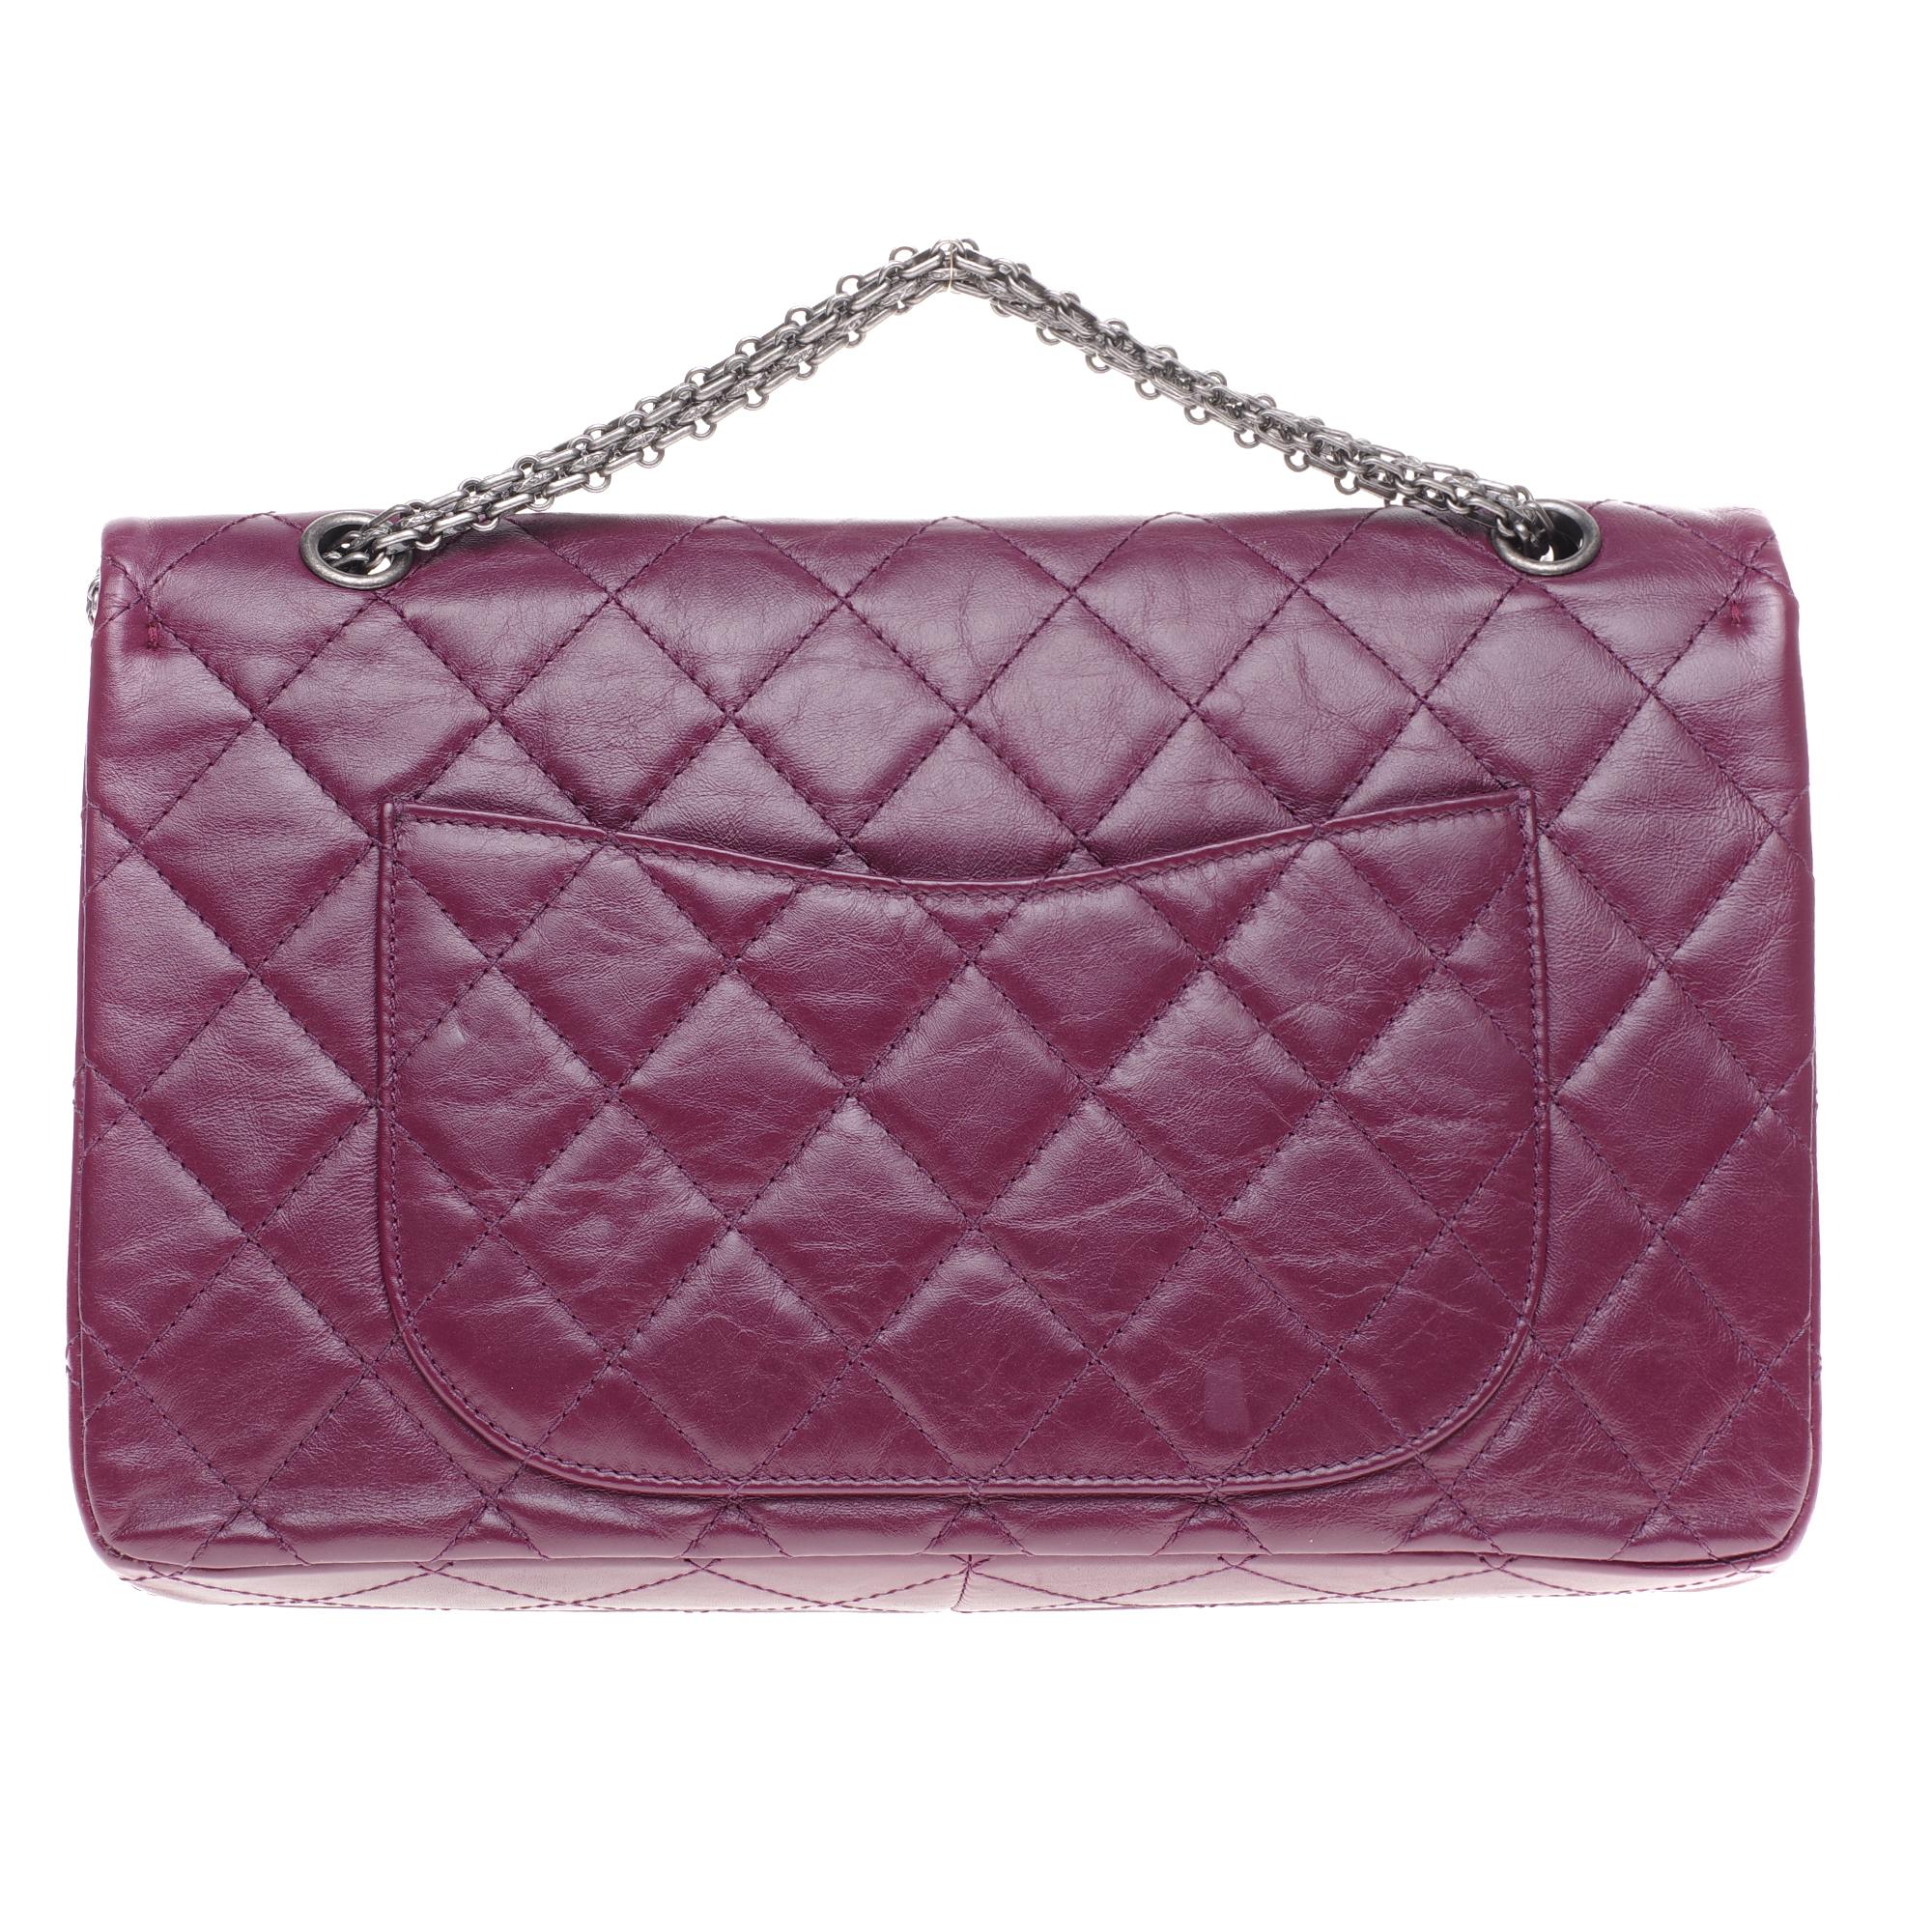 Gray Amazing Chanel 2.55 Reissue handbag in plum quilted leather